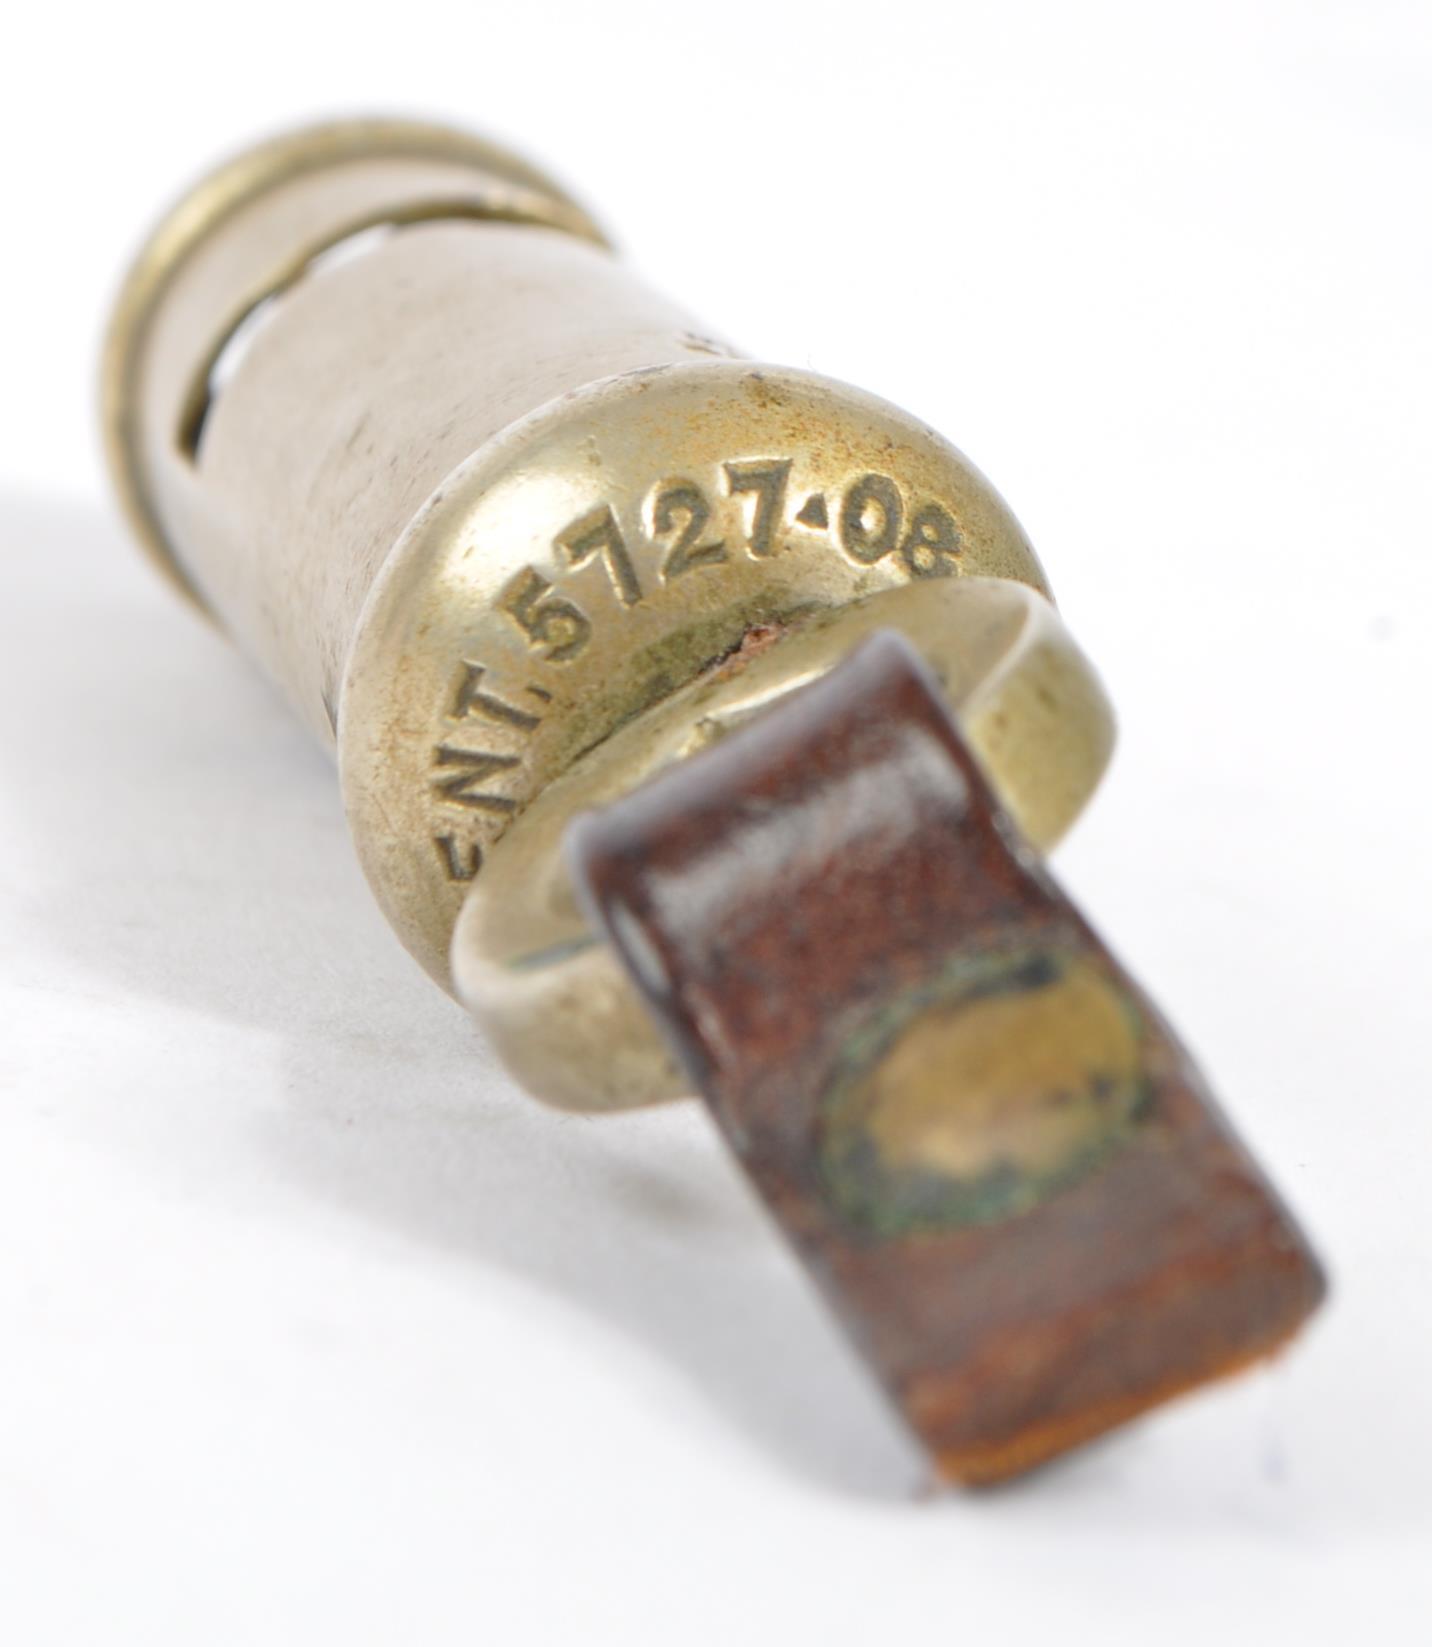 1915 POLICE WHISTLE BY J HUDSON & COMPANY BIRMINGHAM - Image 3 of 4